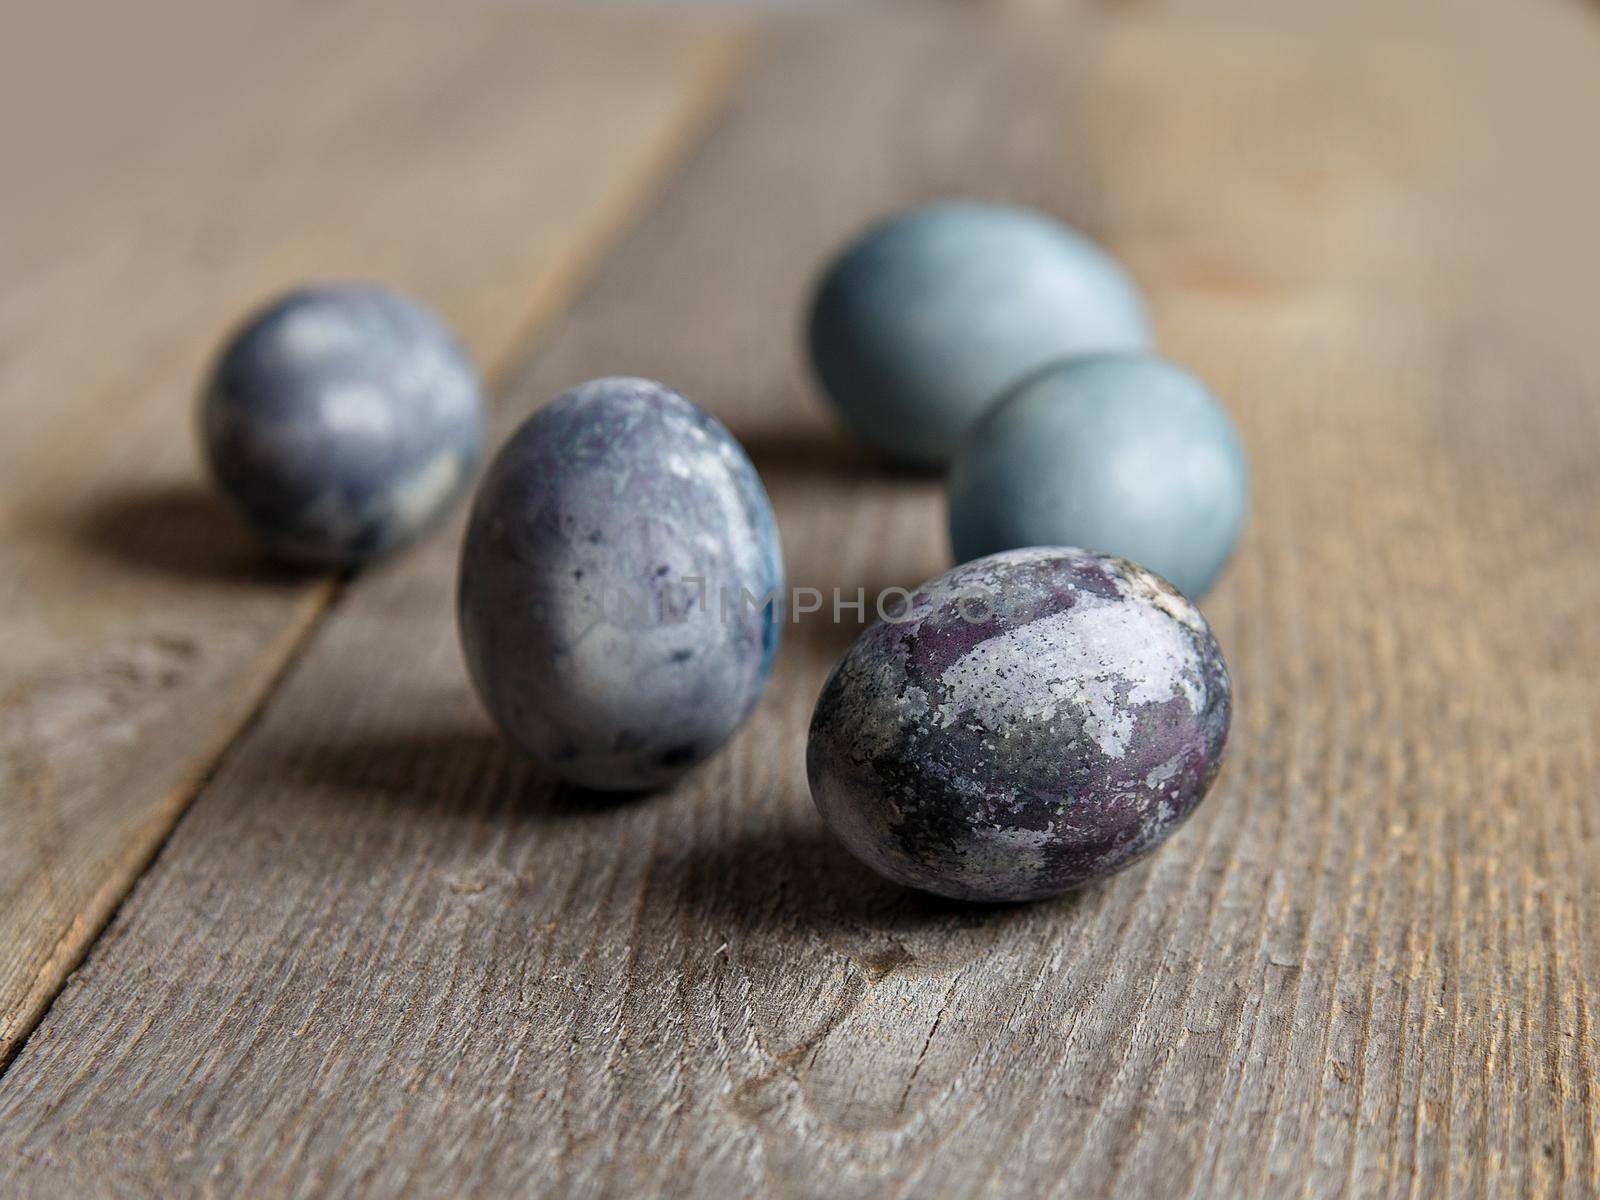 Painted chicken eggs on surface of wooden planks. Selective focus